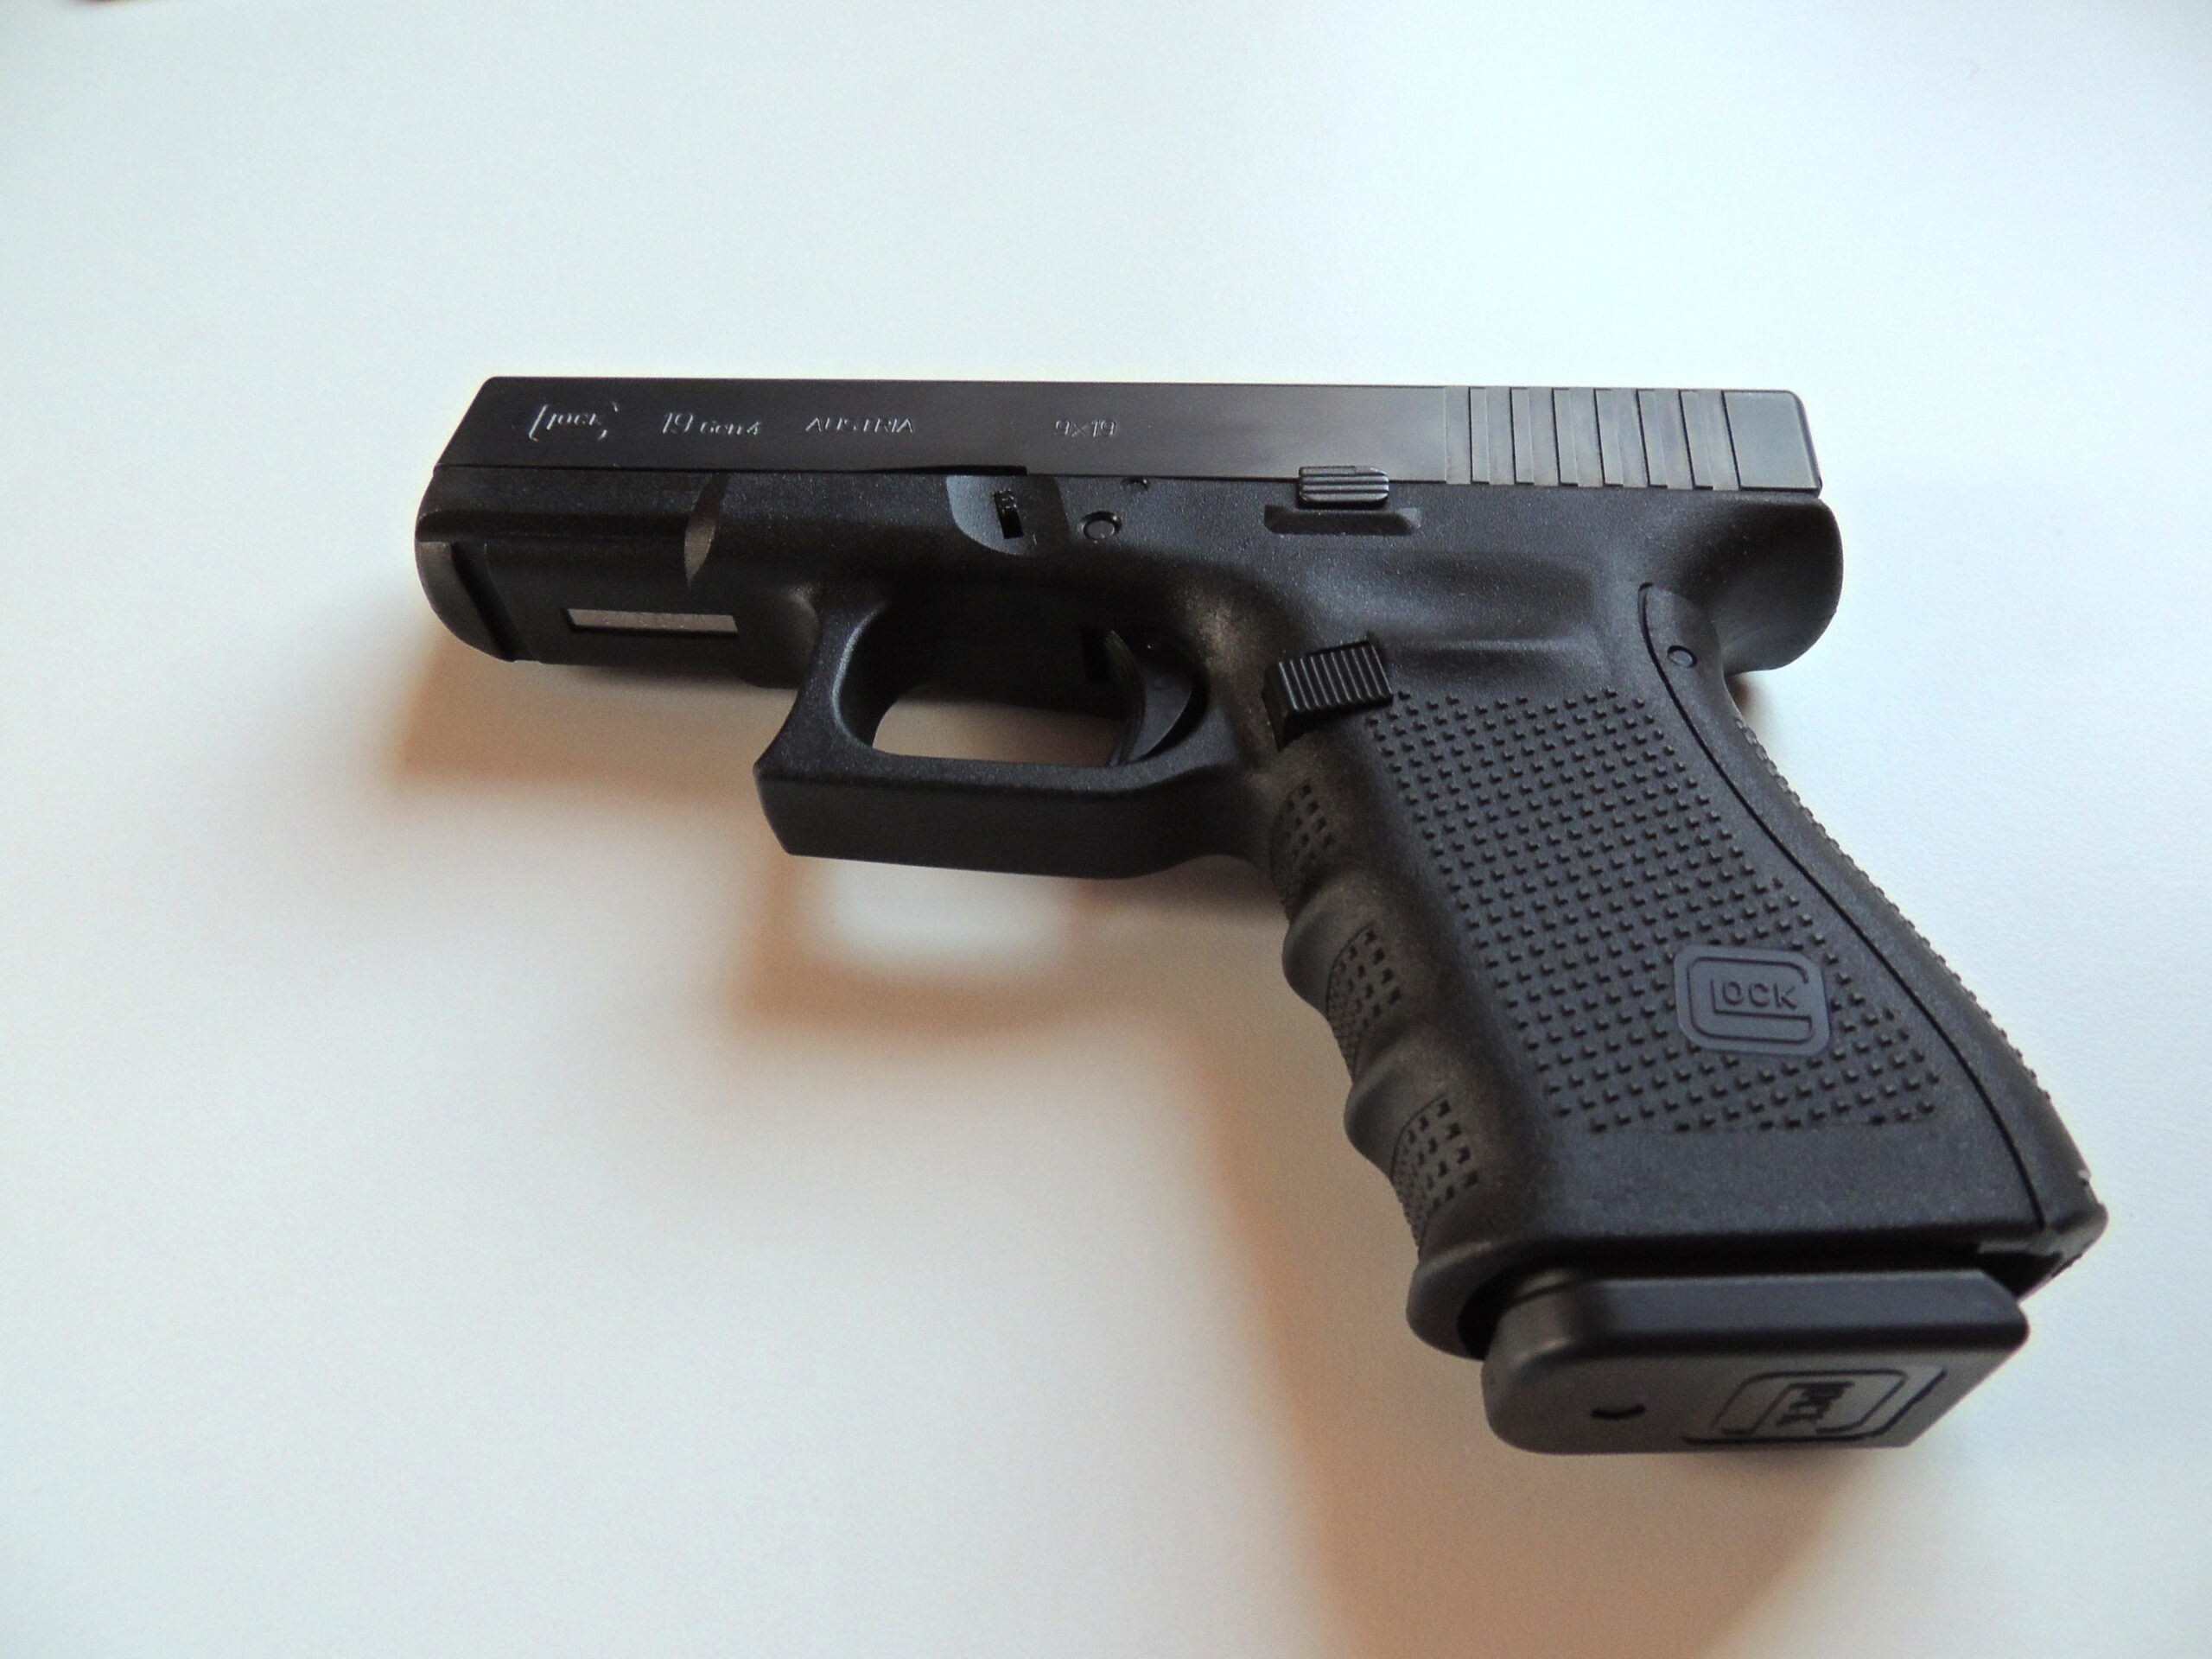 How to disassemble a glock pistol